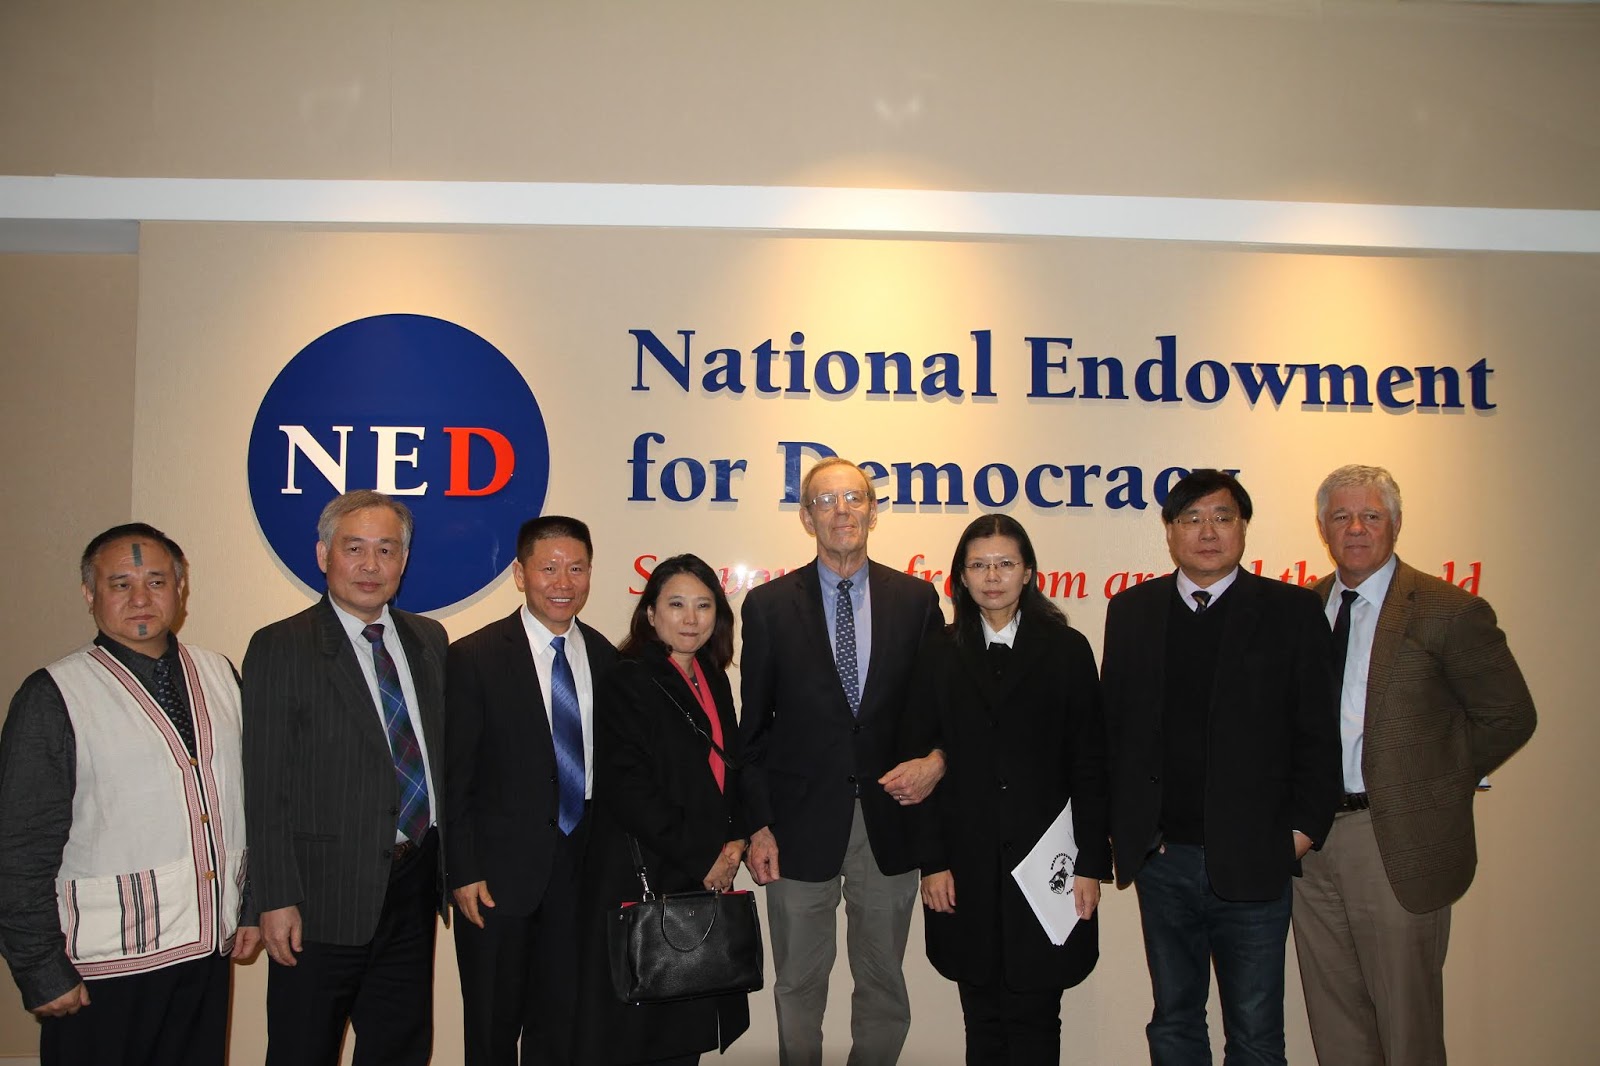 National Endowment for Democracy announces 2019 Democracy Award ceremony - ChinaAid